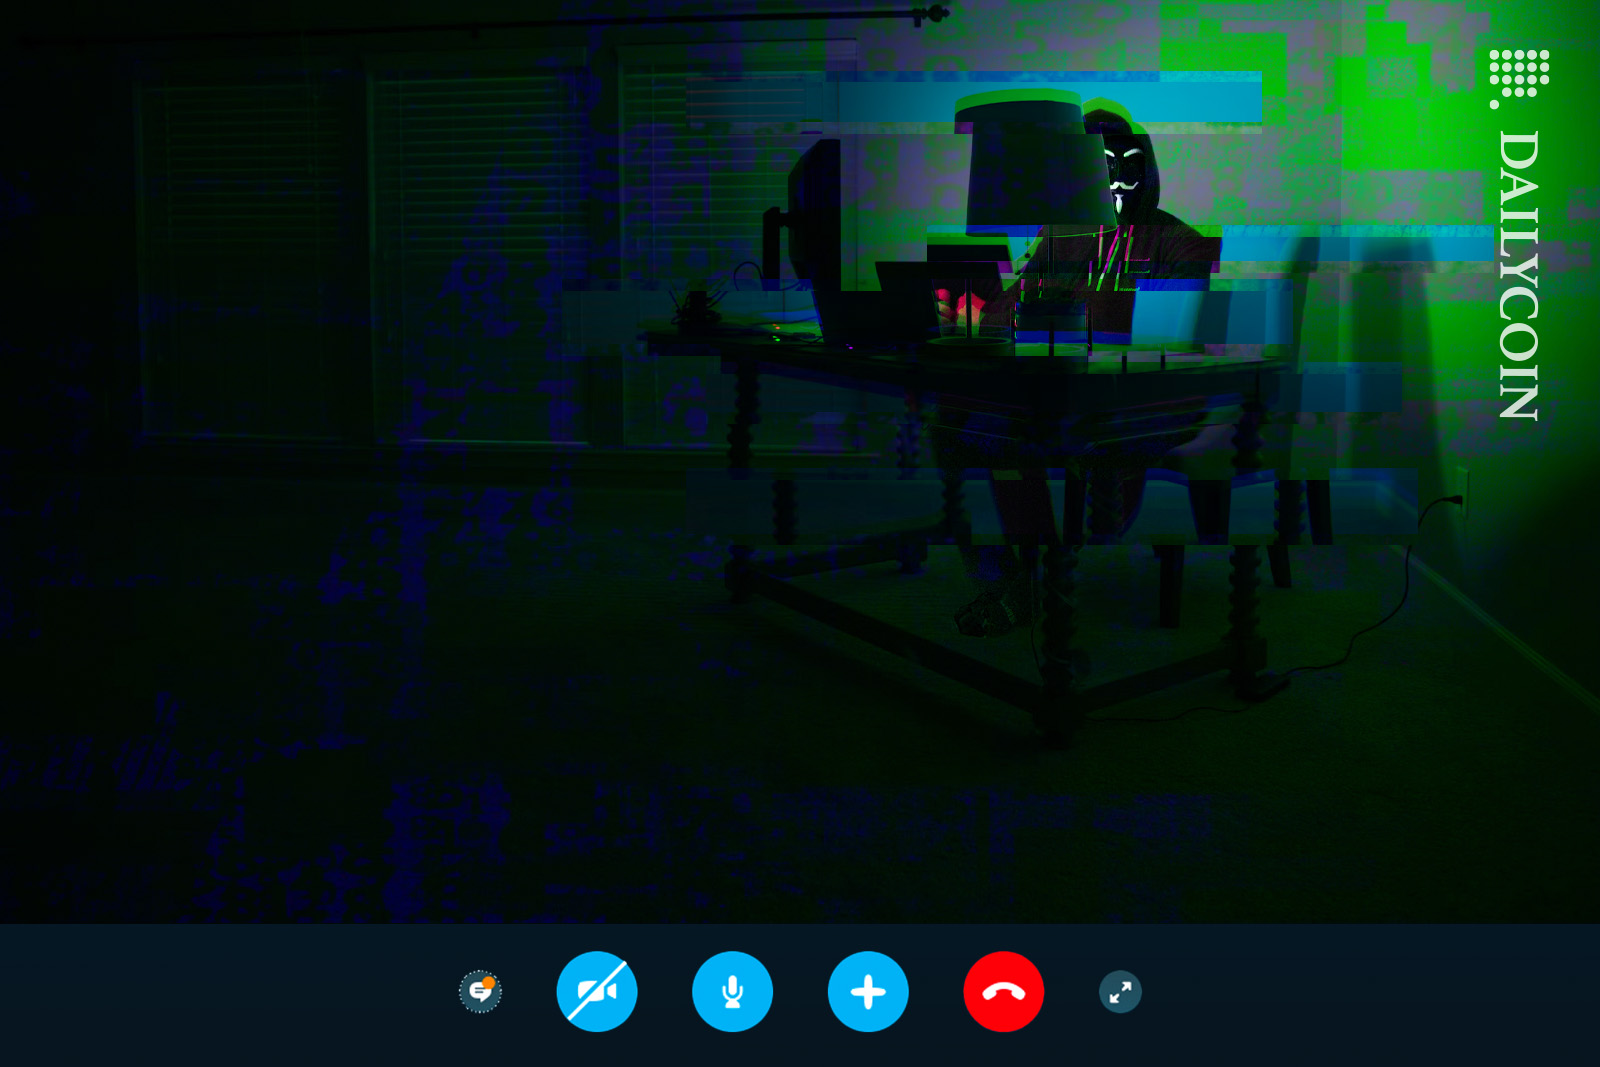 On video chat with a hacker on Skype.